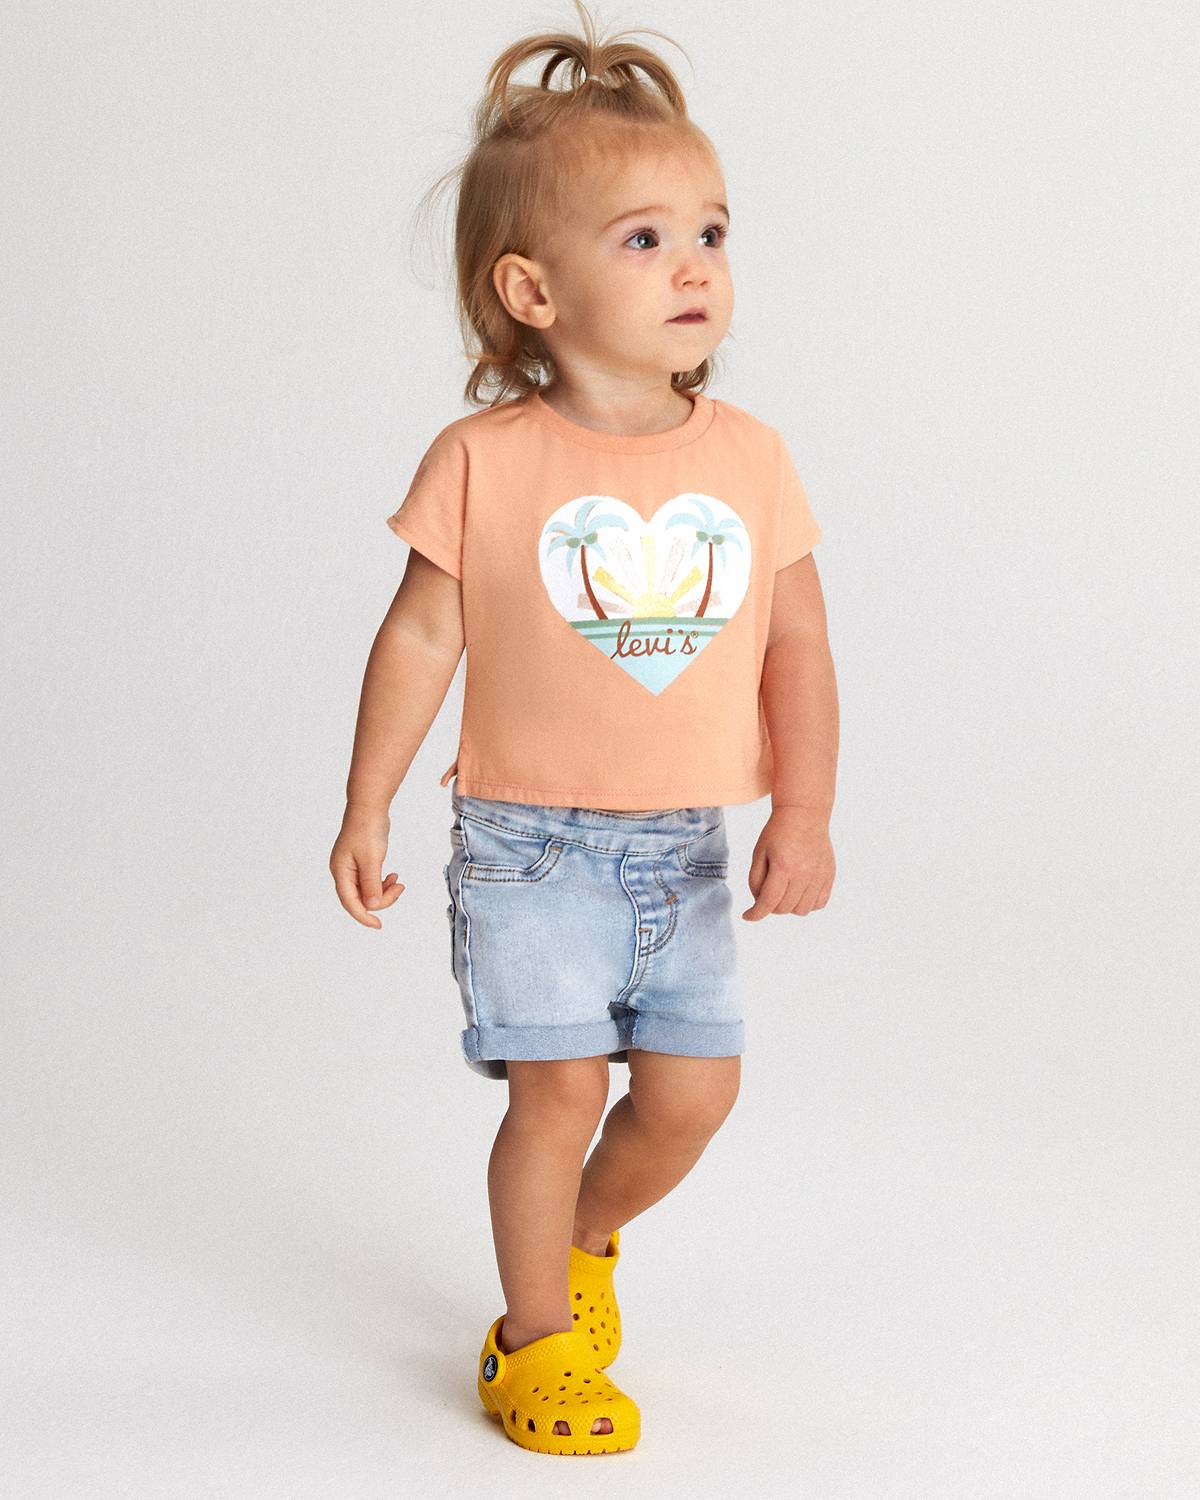 Toddler model wearing shorts and a tee.